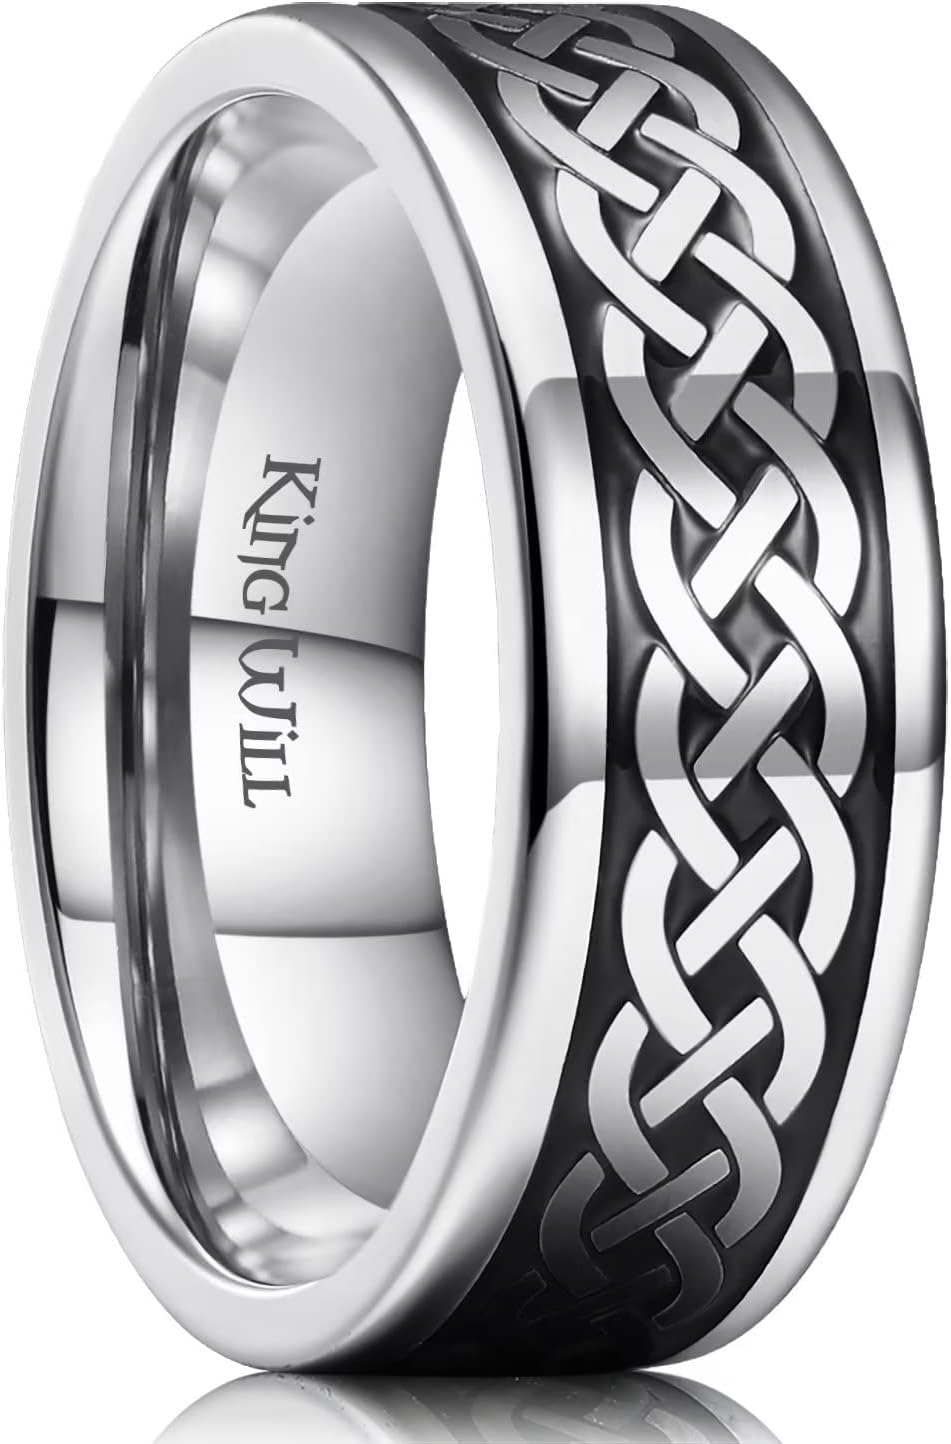 King Will Stainless Steel Wedding Band for Men - 8mm Black Silver Plated High Polished Inlay Celtic knot Ring for Everyday Wear Comfort Fit